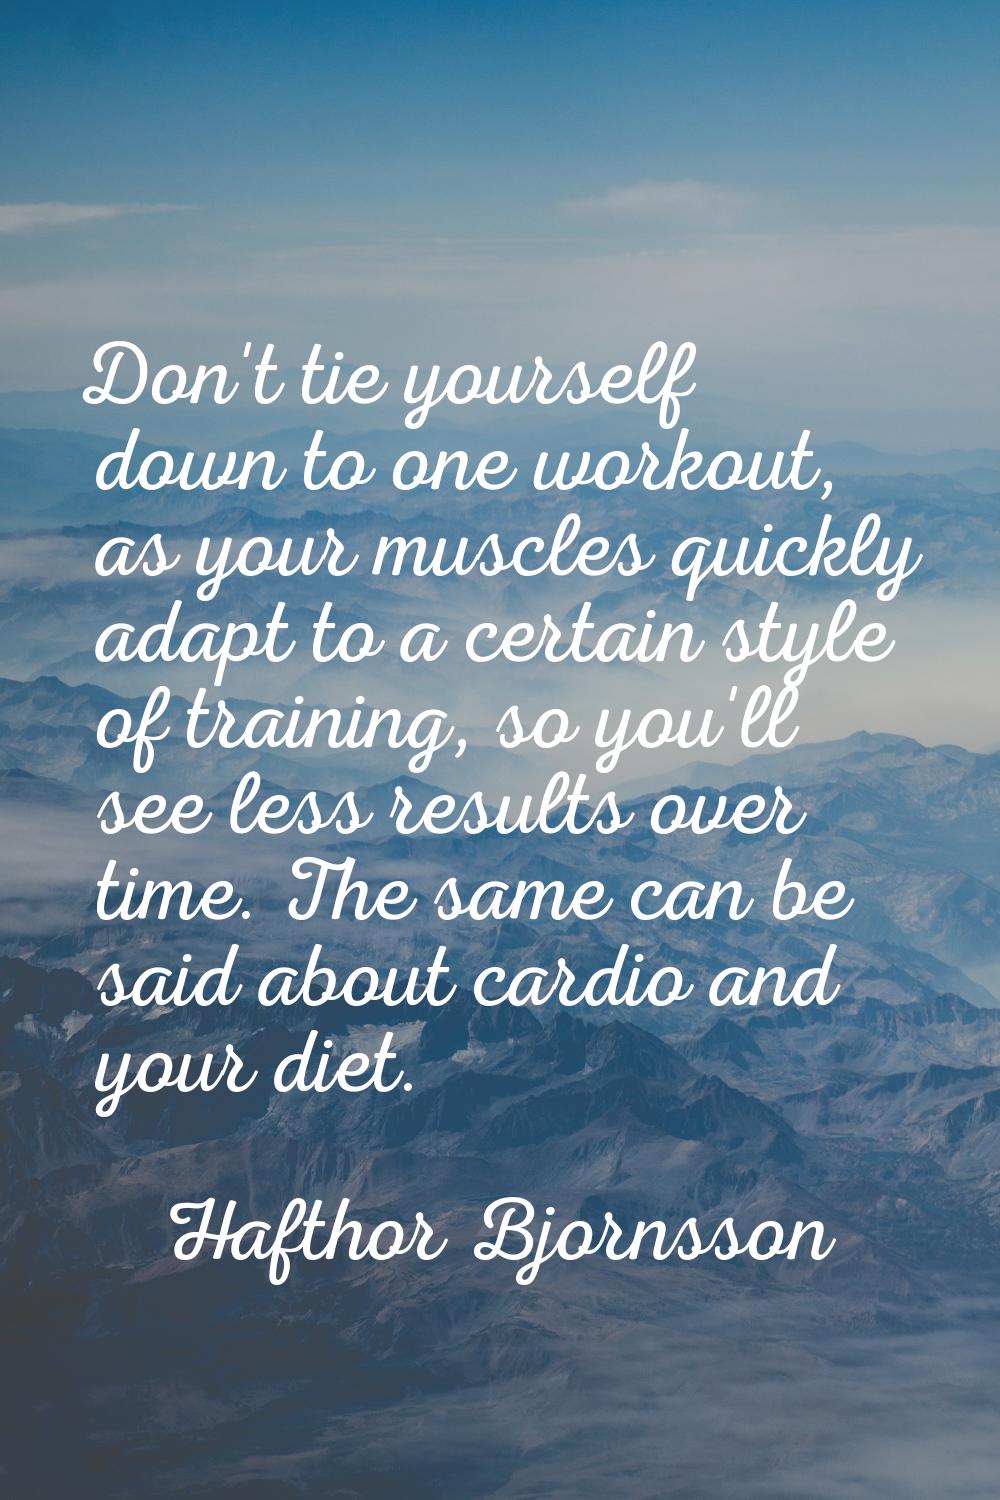 Don't tie yourself down to one workout, as your muscles quickly adapt to a certain style of trainin